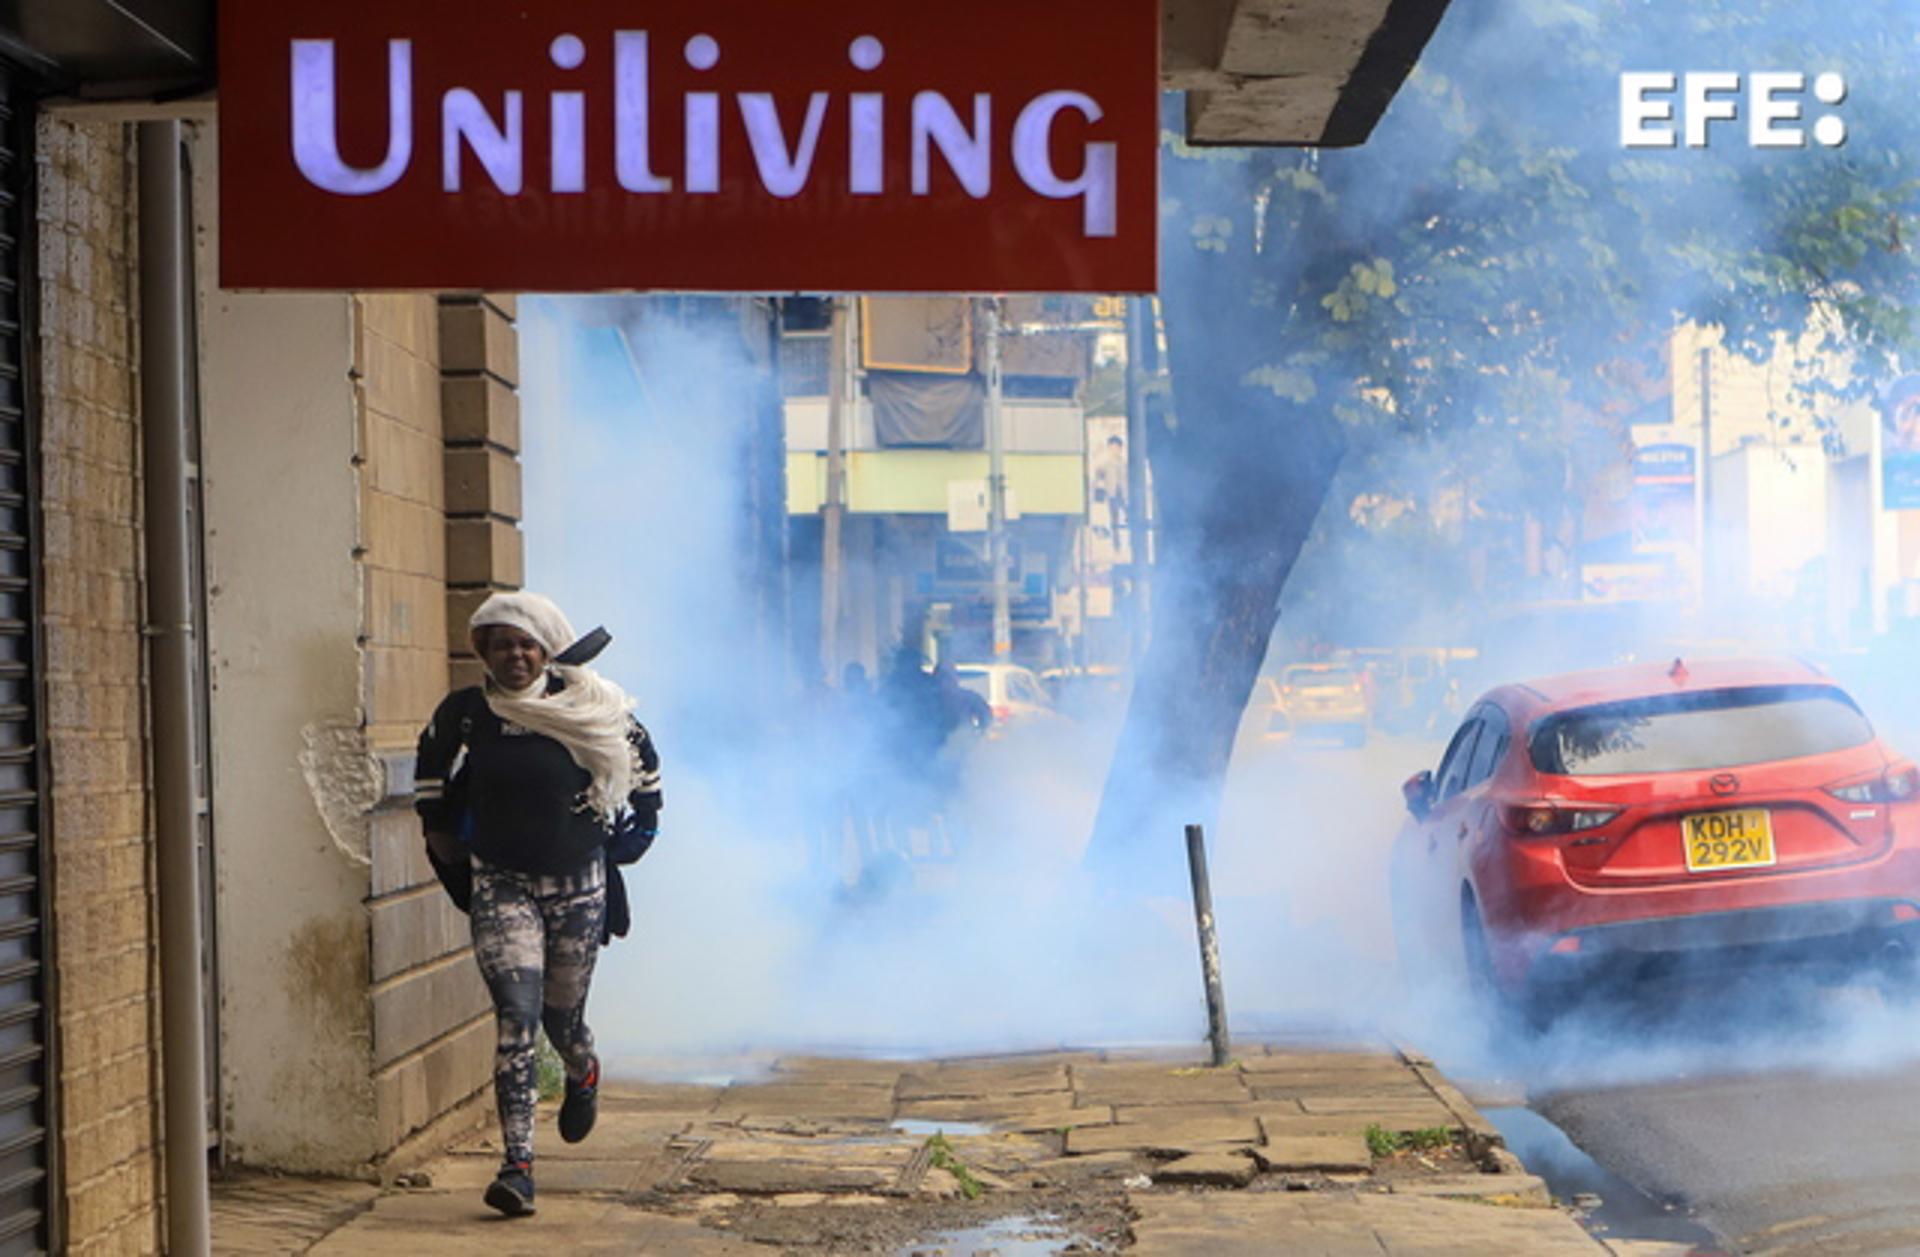 A woman runs away from tear gas during a rally against tax increases in Nairobi on 7 July 2023. EFE/EPA/STRINGER
